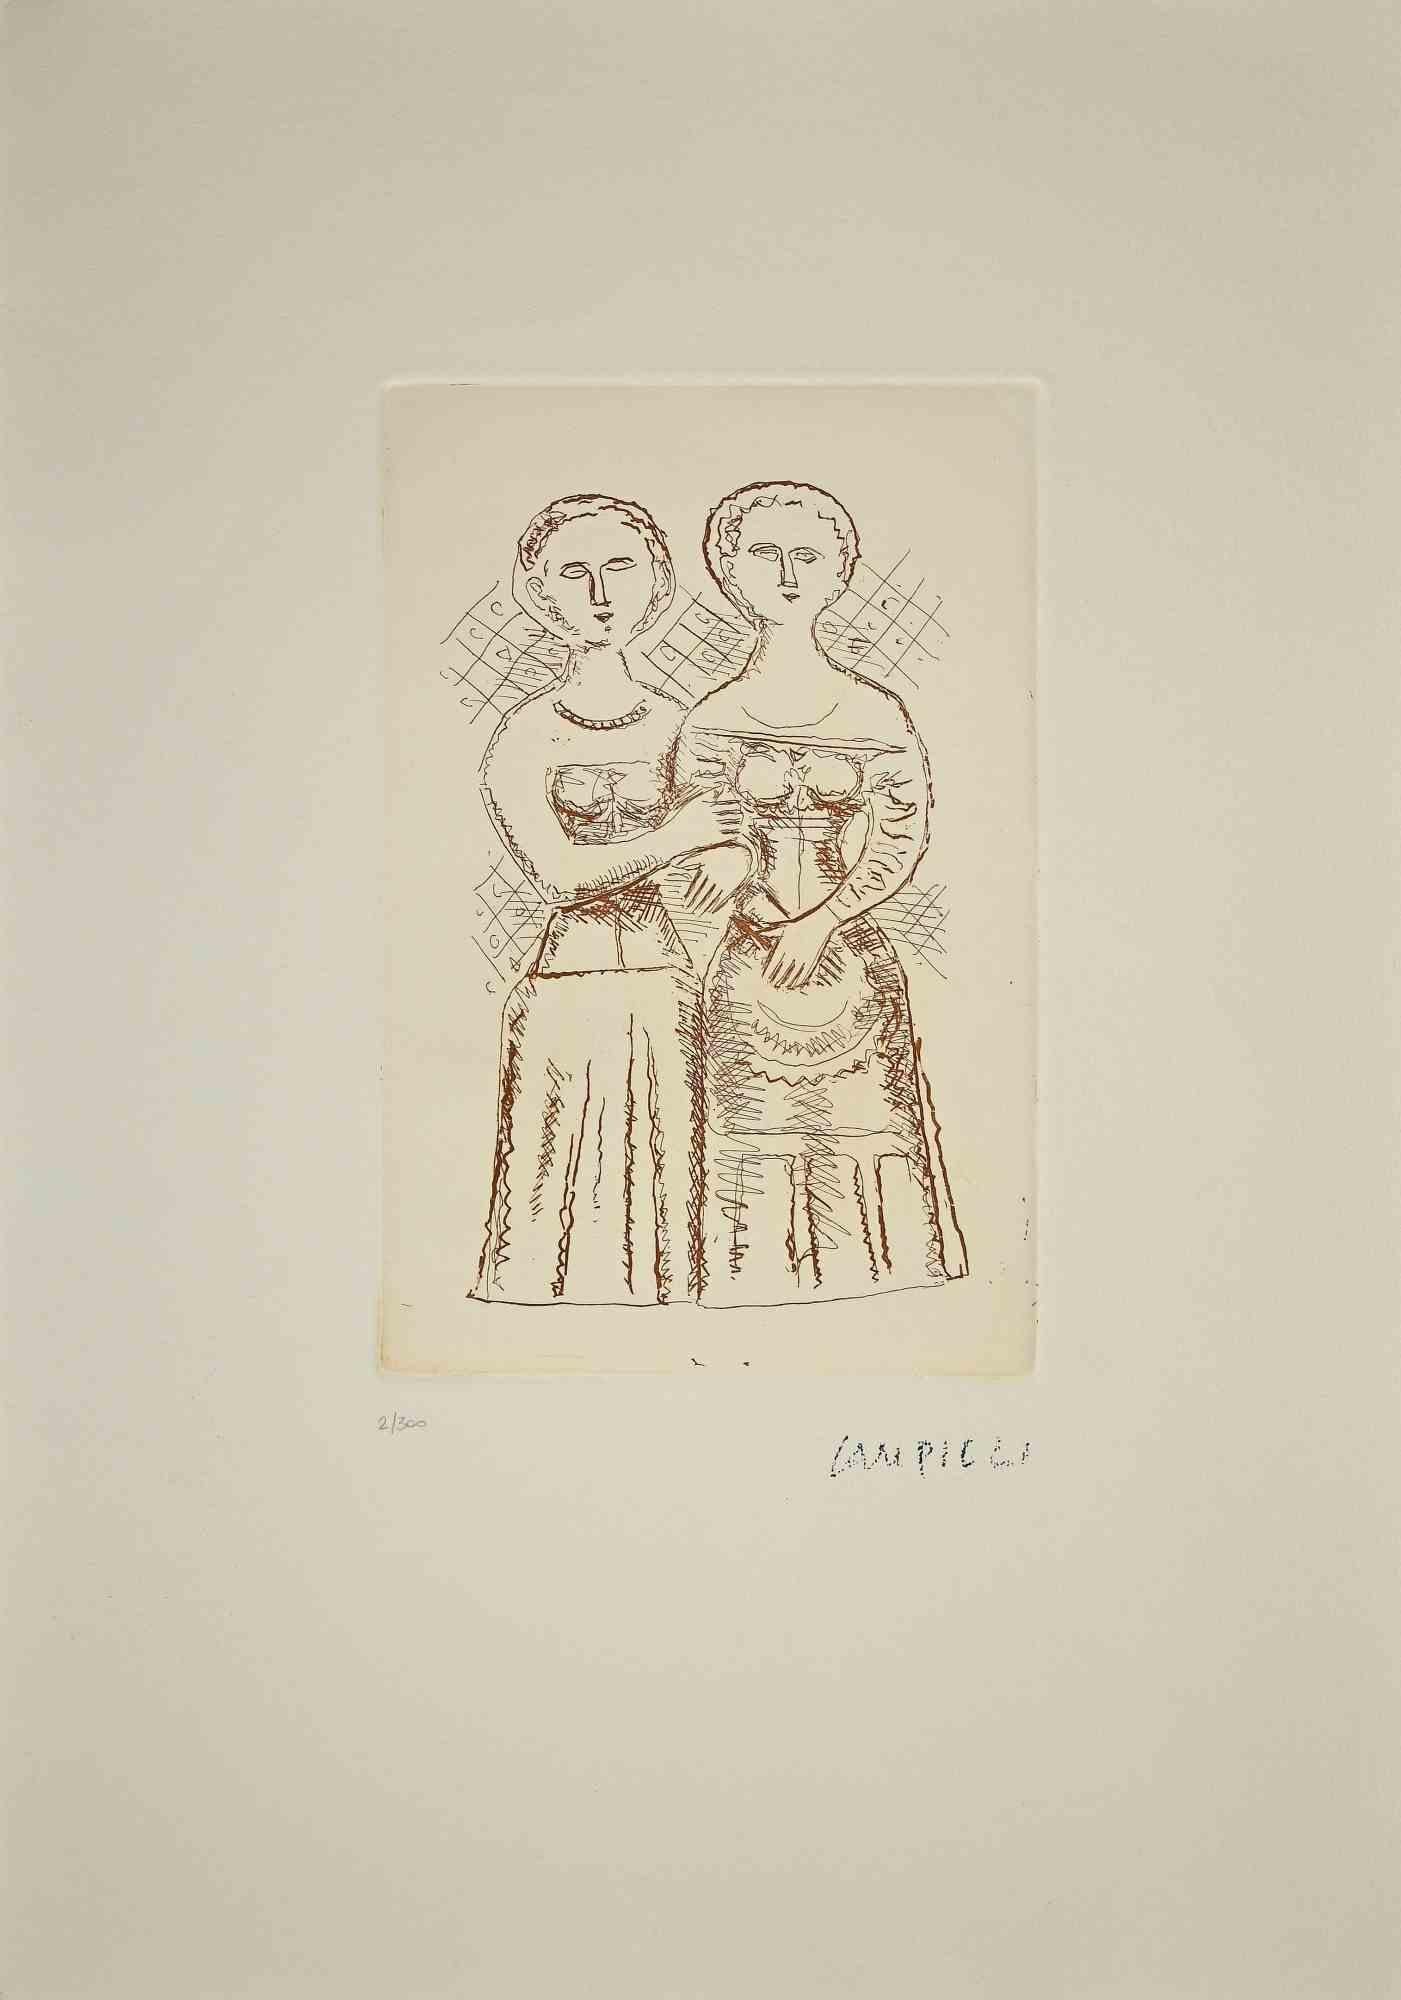 The two women is an print realized by Massimo Campigli in the 1970/1971s.

Beautiful etching and drypoint on paper.

This artwork it is part of a series of works created in the last period of the artist and printed at the turn of the year of his